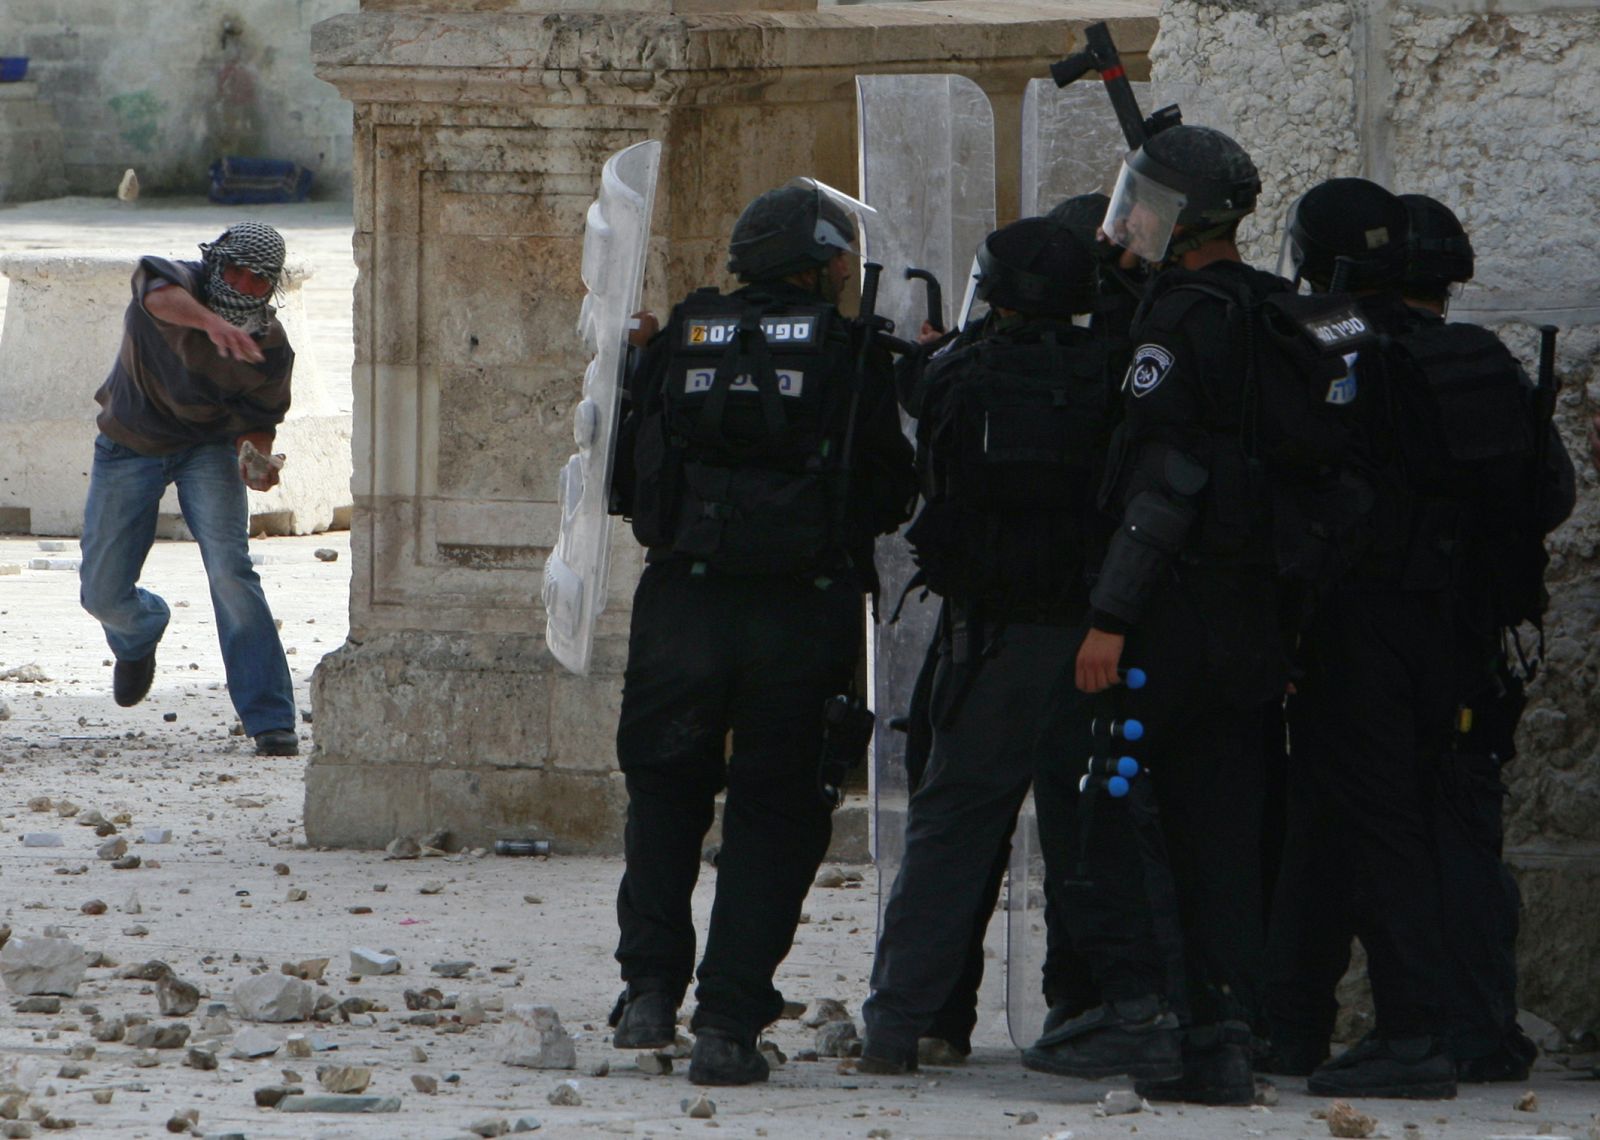 A Palestinian throws a stone at Israeli police during clashes in Jerusalem's Old City